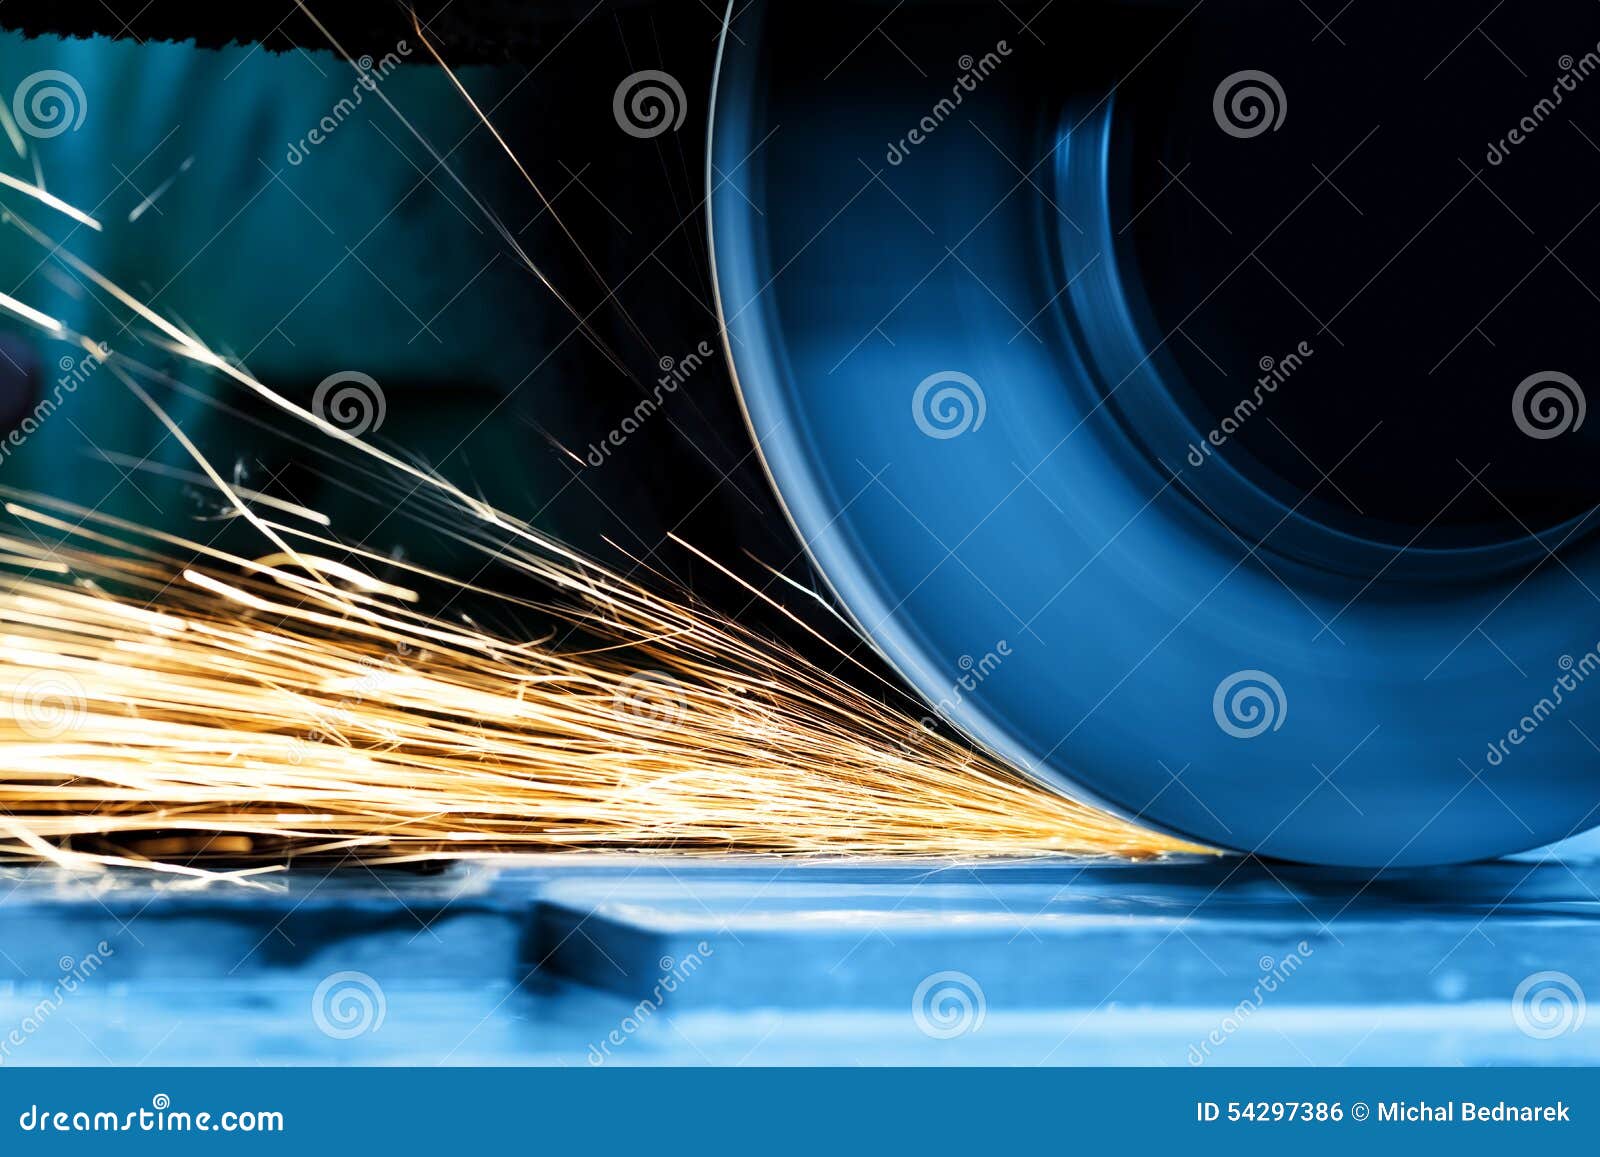 sparks from grinding machine. industrial, industry